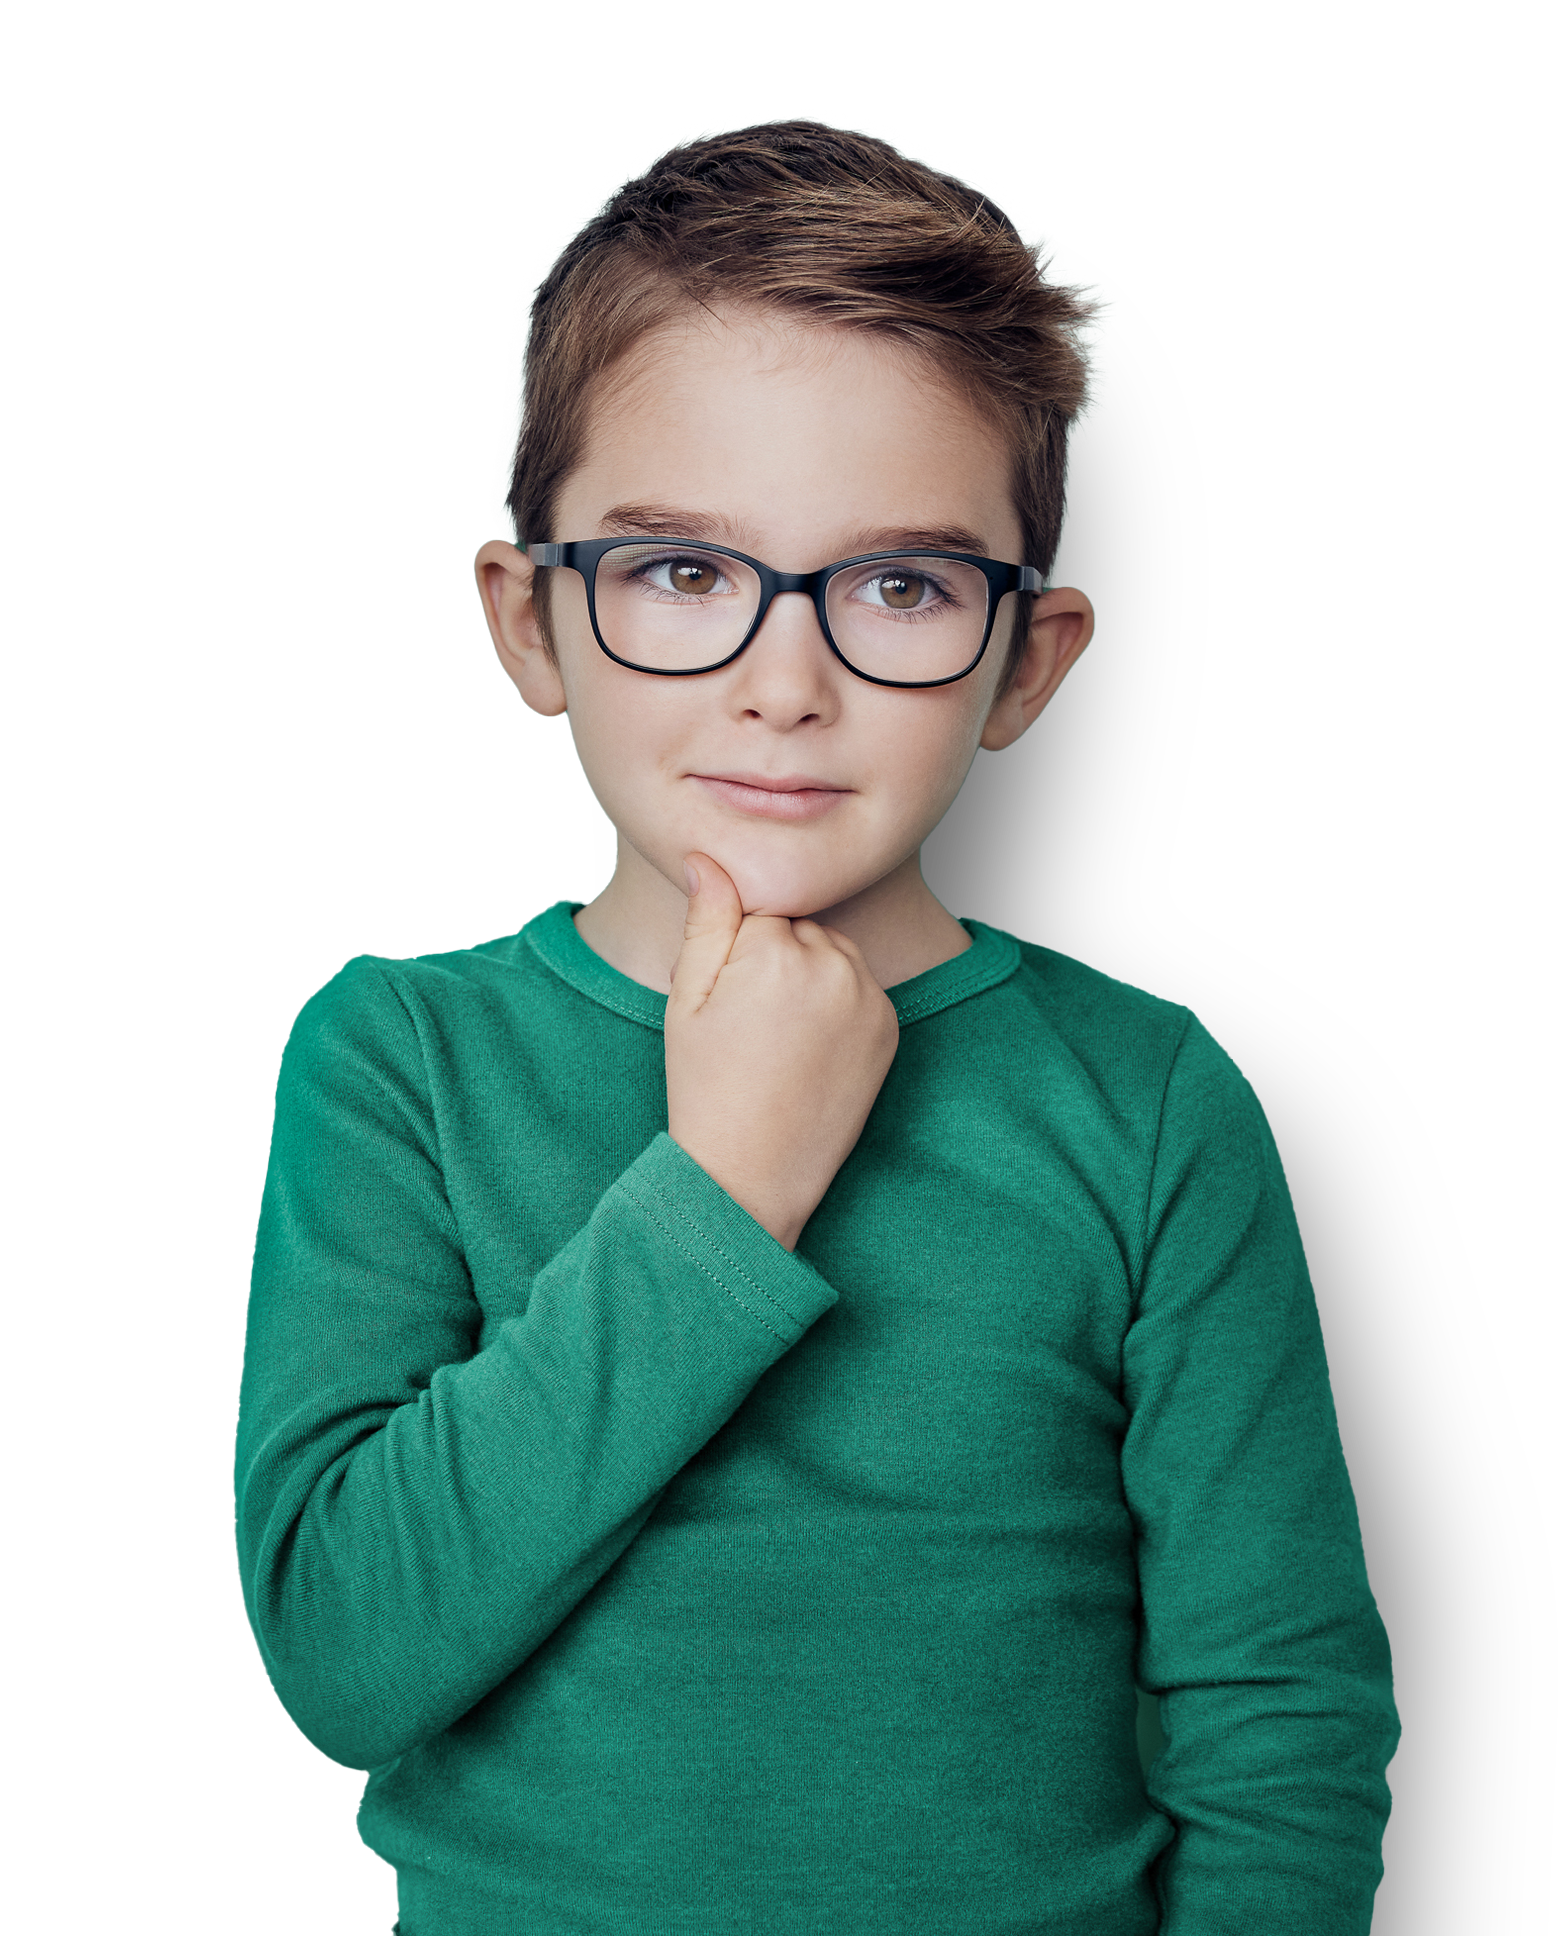 A young boy in glasses posing with his hand on his chin.